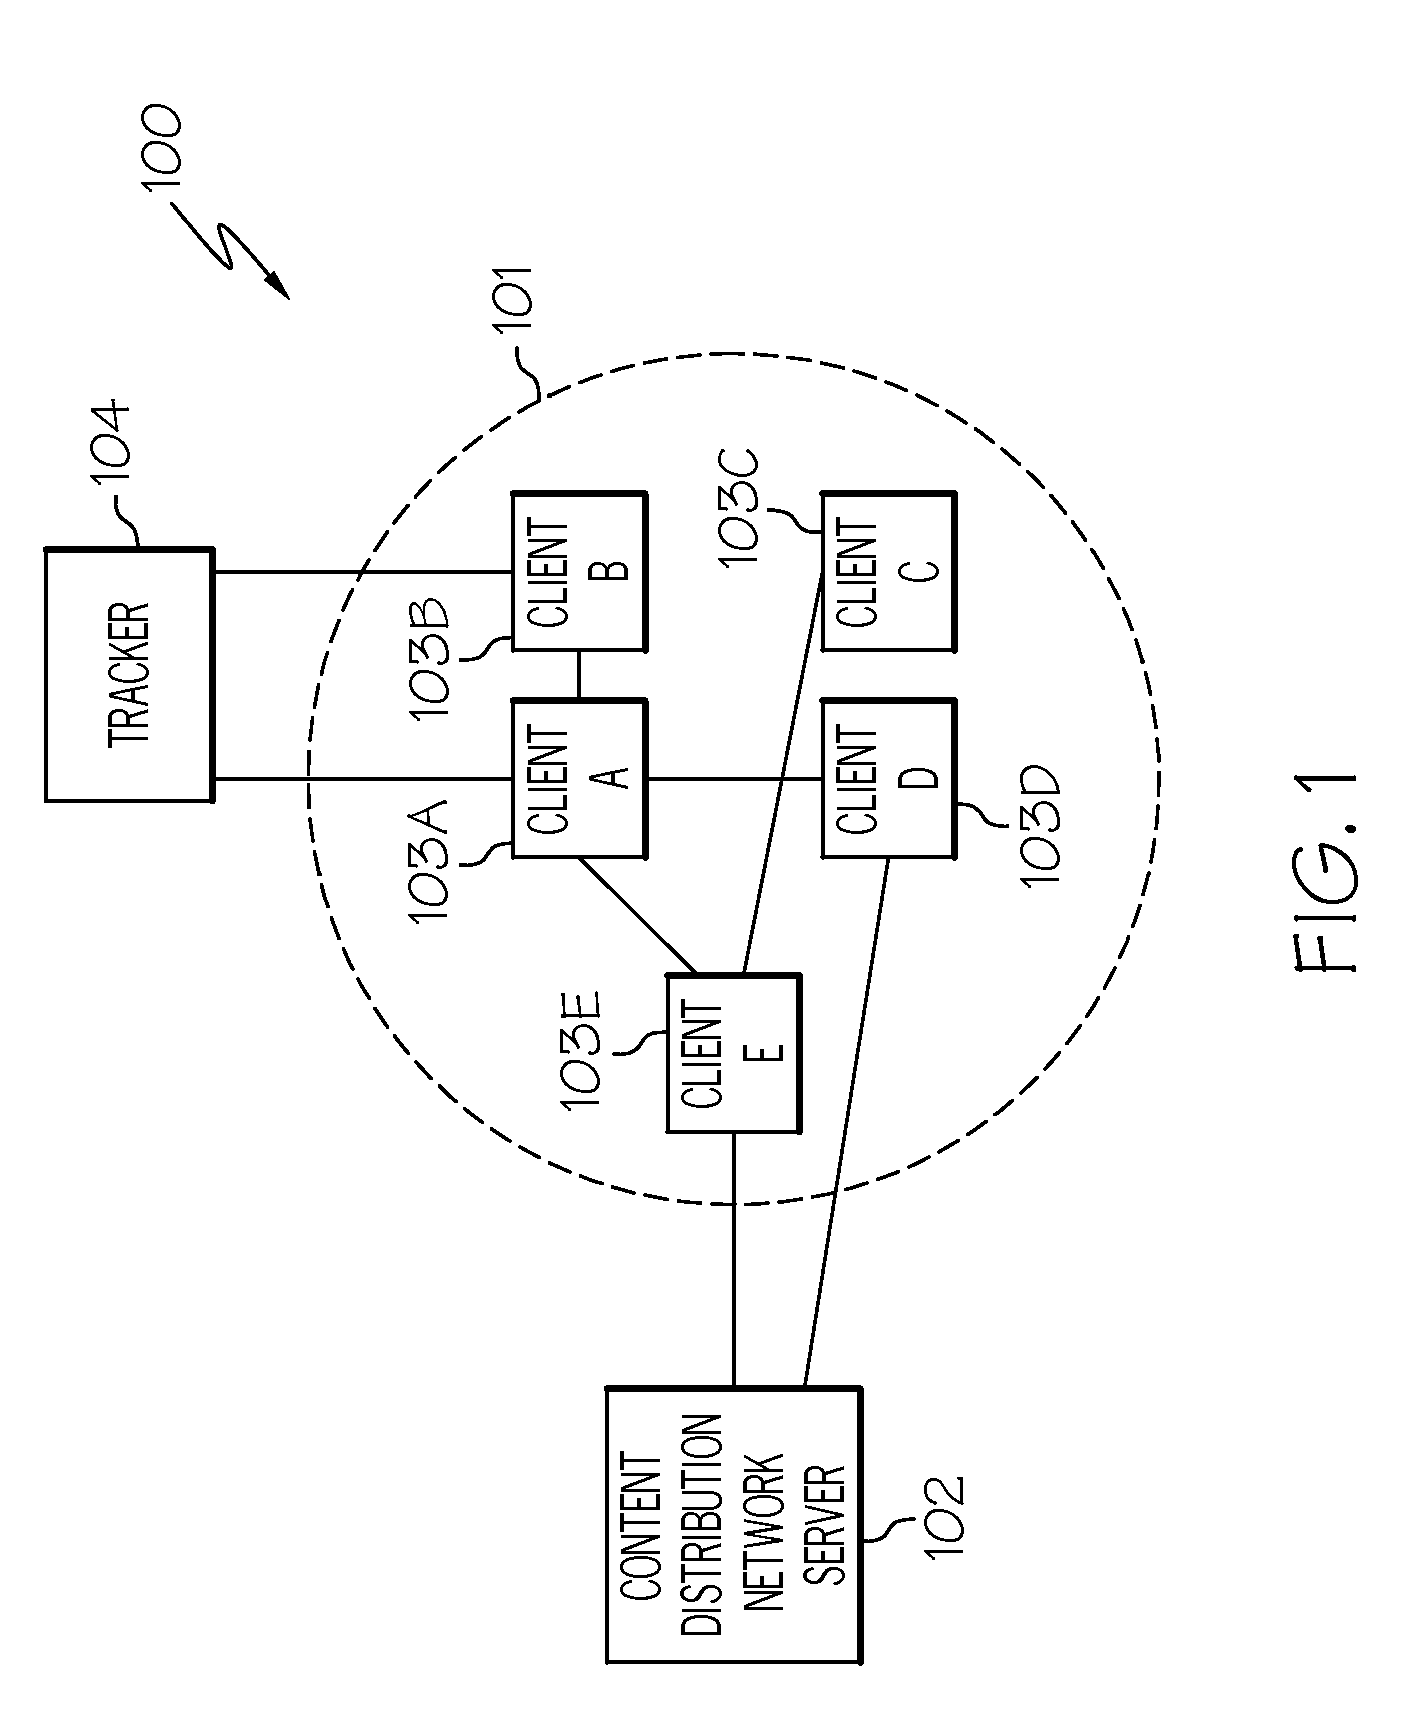 Efficiently distributing video content using a combination of a peer-to-peer network and a content distribution network